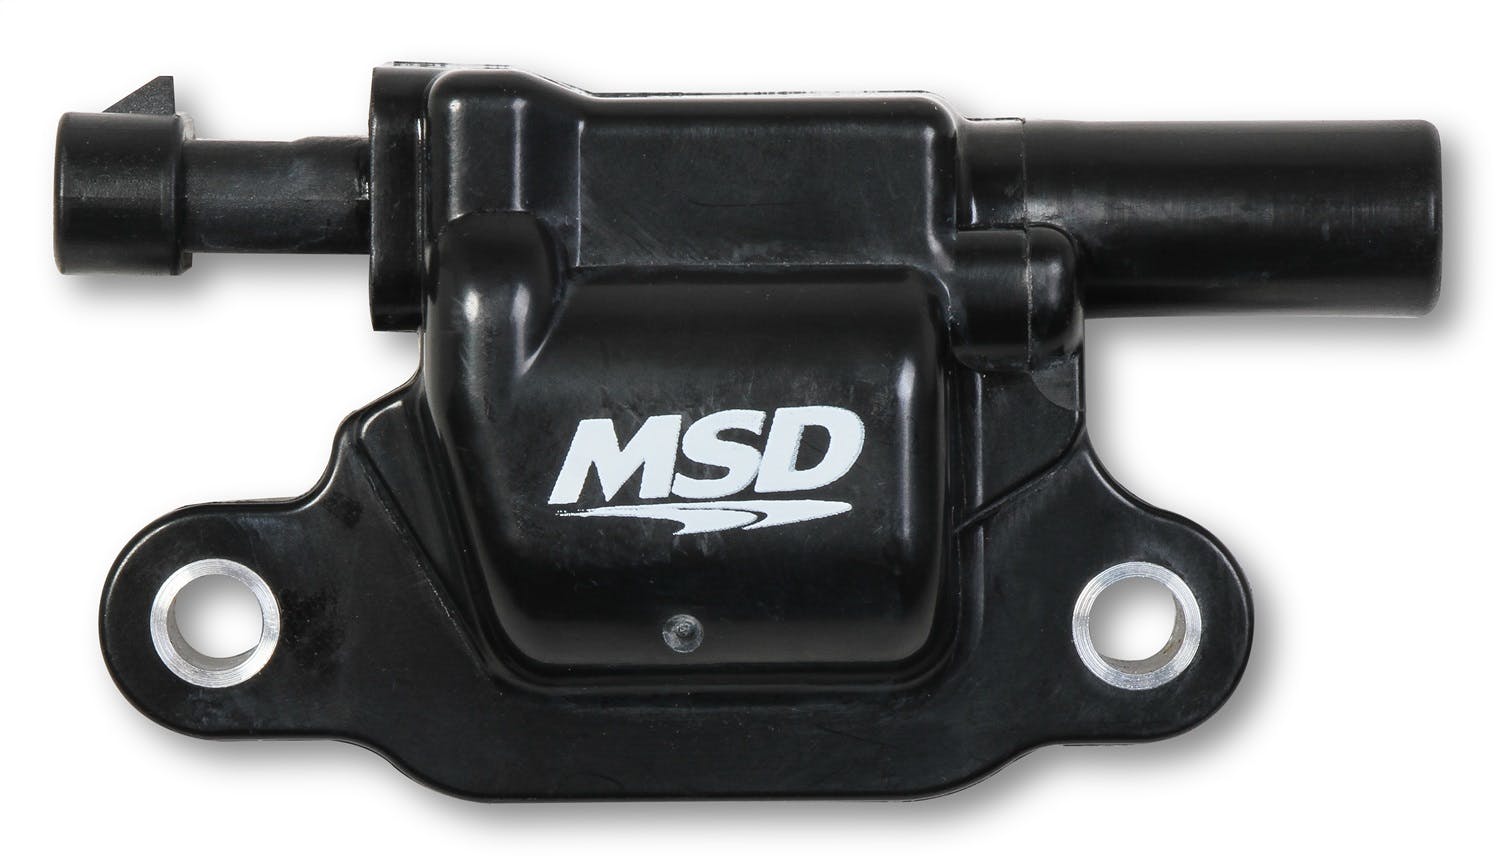 MSD Performance 826683 Coils, Blk, Square, 14 and up GM V8, 8-pk